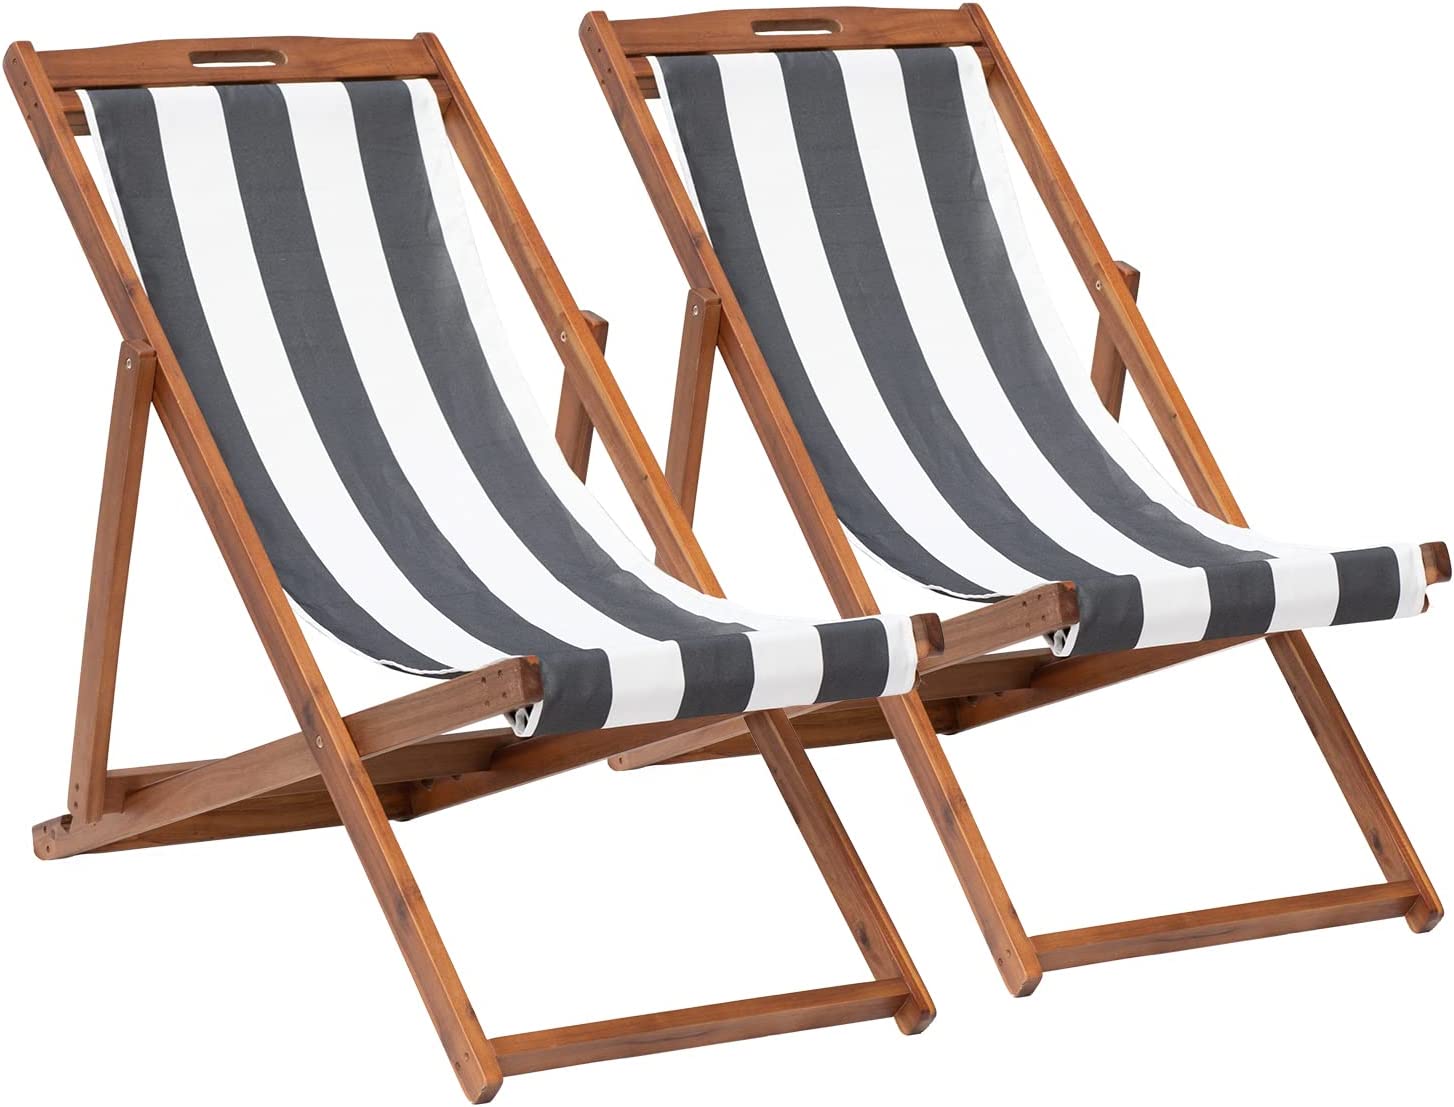 Beach Sling Chair Set, Folding Adjustable Frame Patio Lounge Chair Set of 2 Outdoor Solid Wood Frame Portable Reclining Beach Chair with White Polyester Canvas 3 Level for Beach Swimming Pool - image 1 of 7